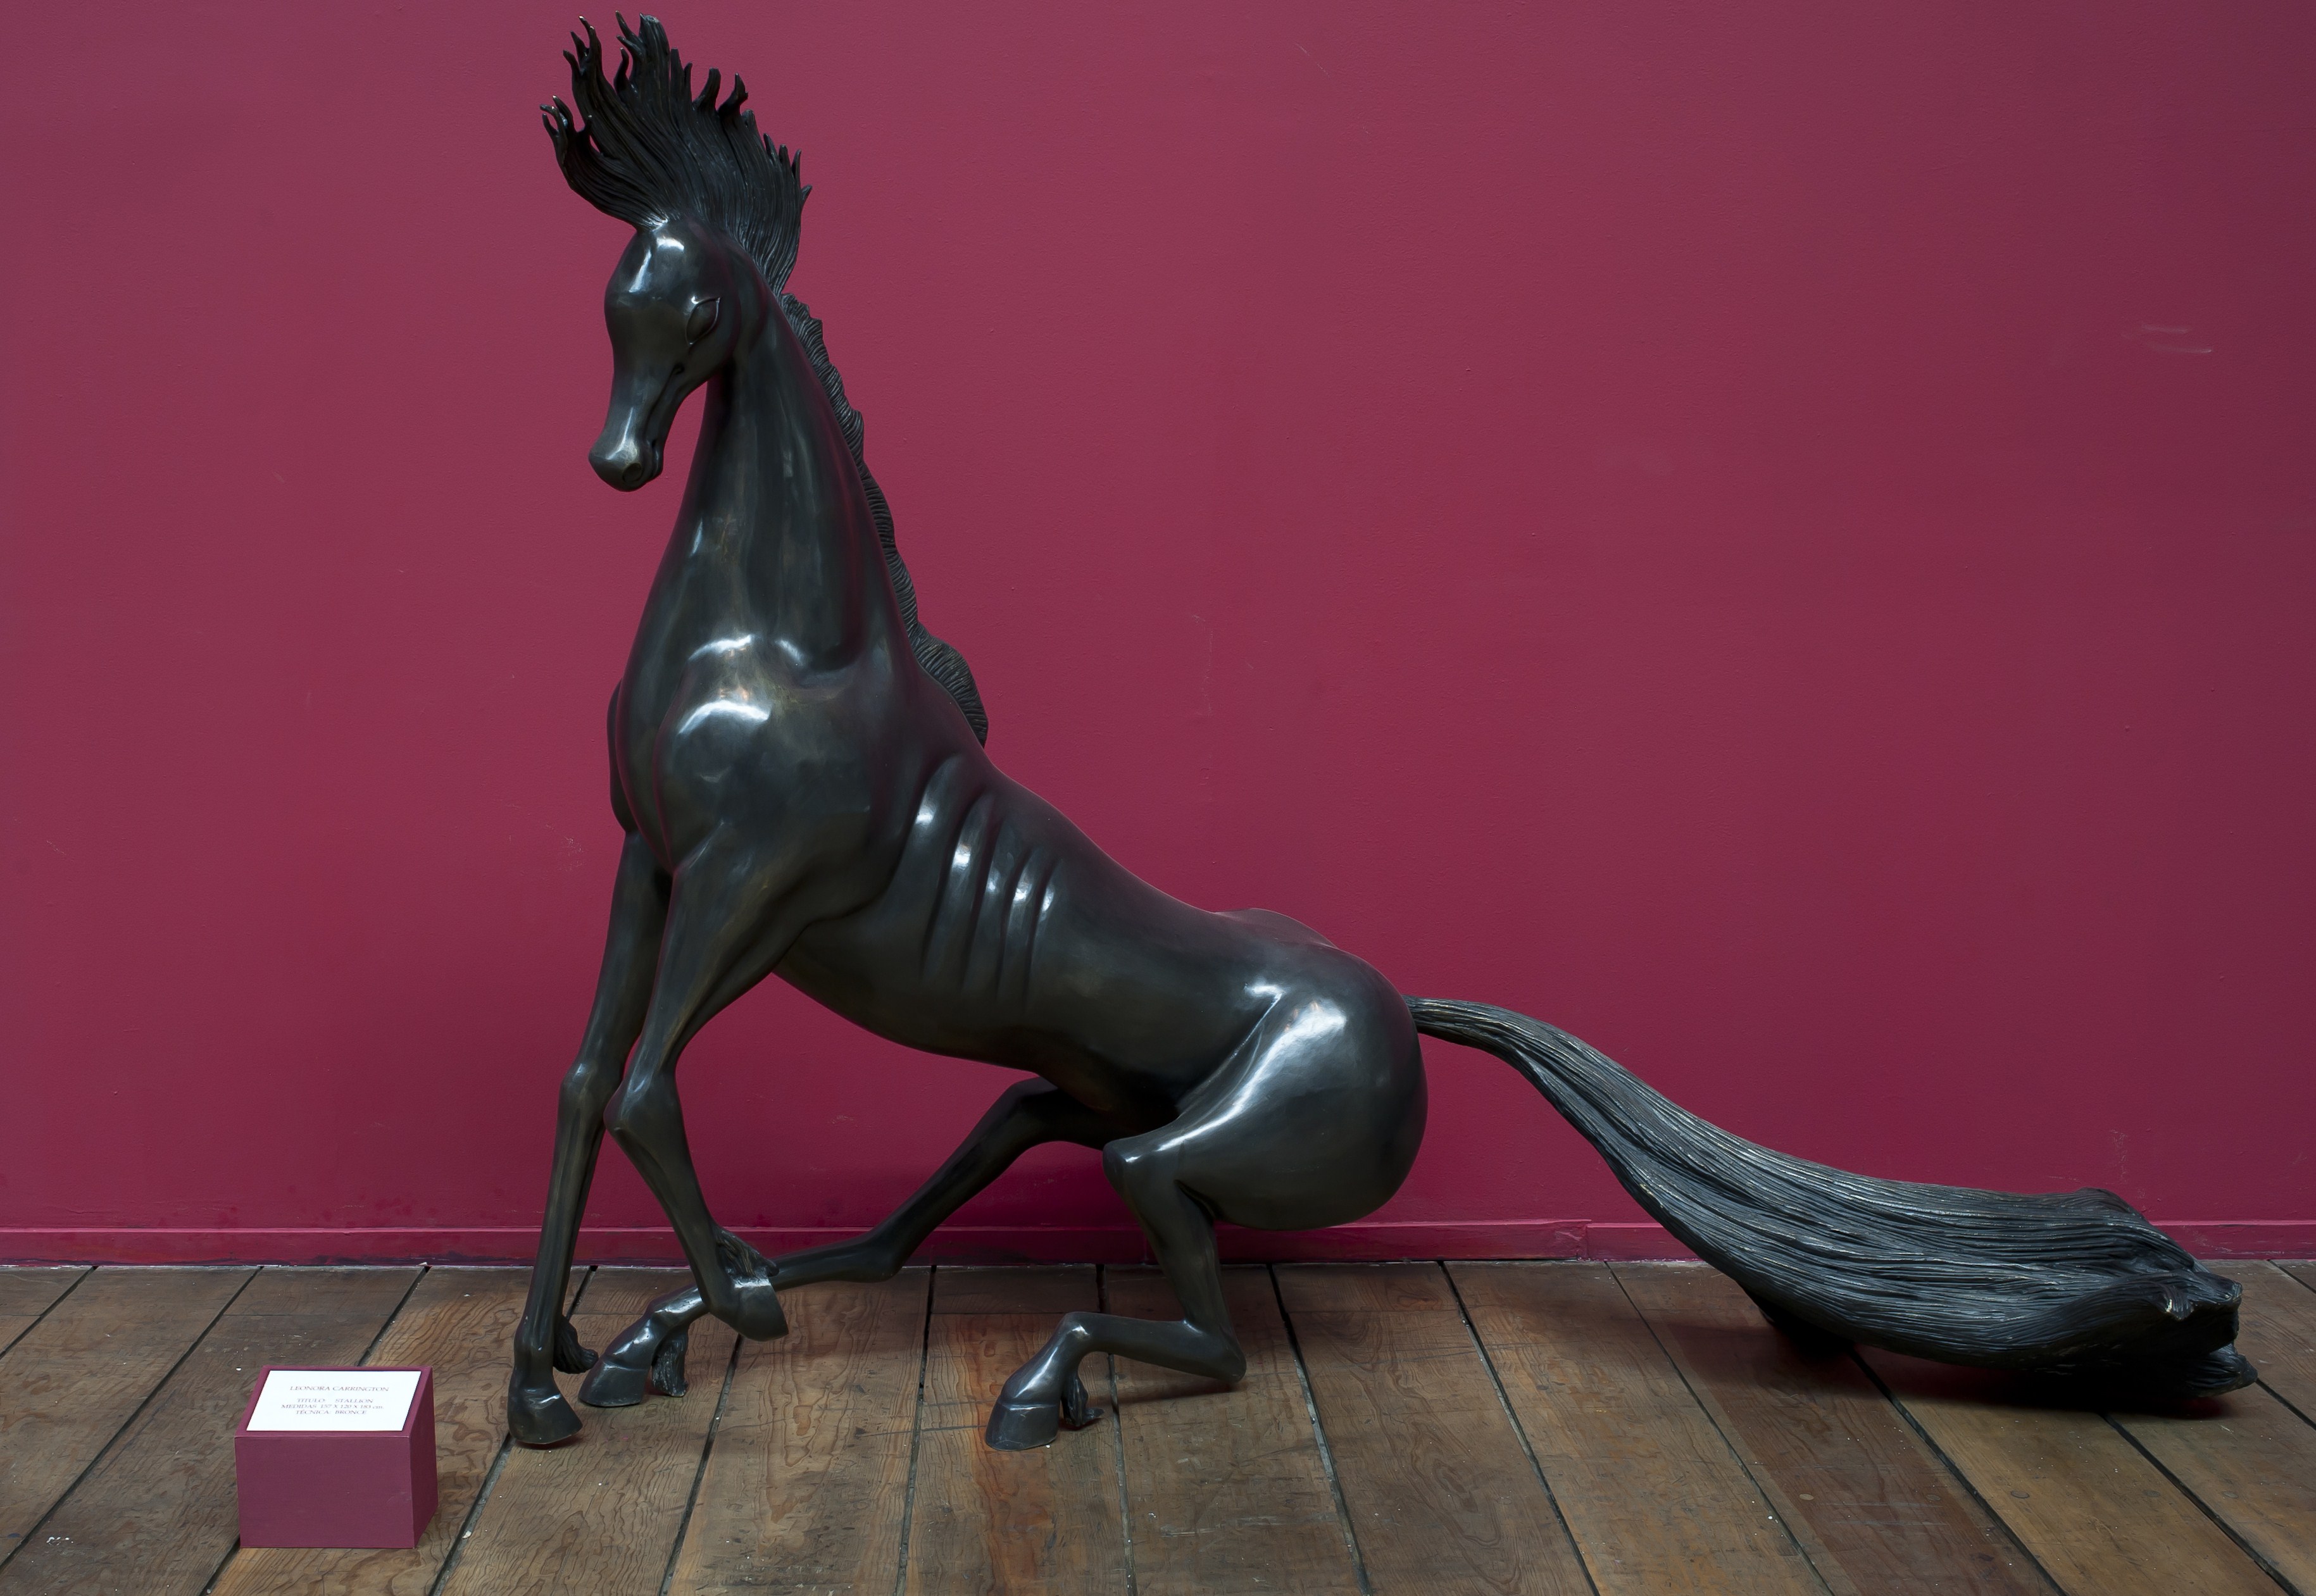 Picture of the sculpture “Stallion" on display at the Estacion Indianilla museum in Mexico City, on April 14, 2011 as part of the exhibition of Mexican sculptor Leonora Carrington. (Getty)